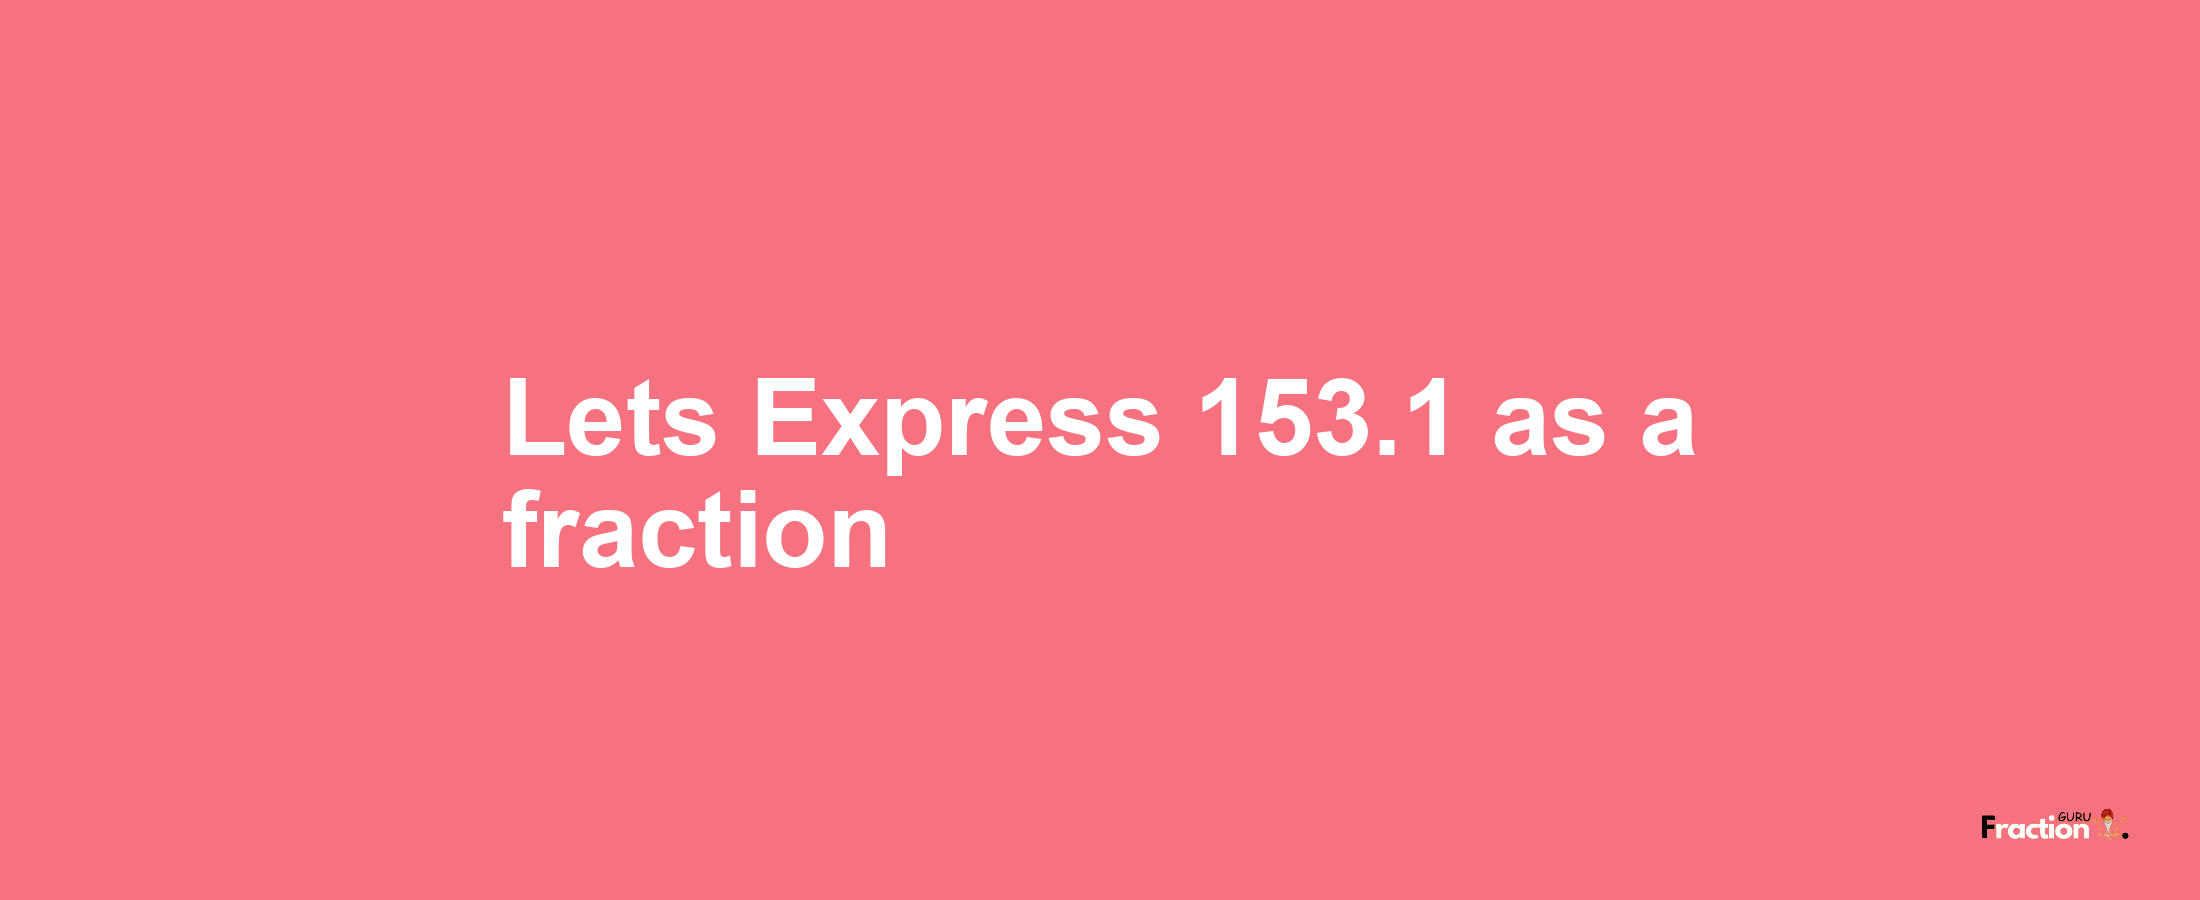 Lets Express 153.1 as afraction